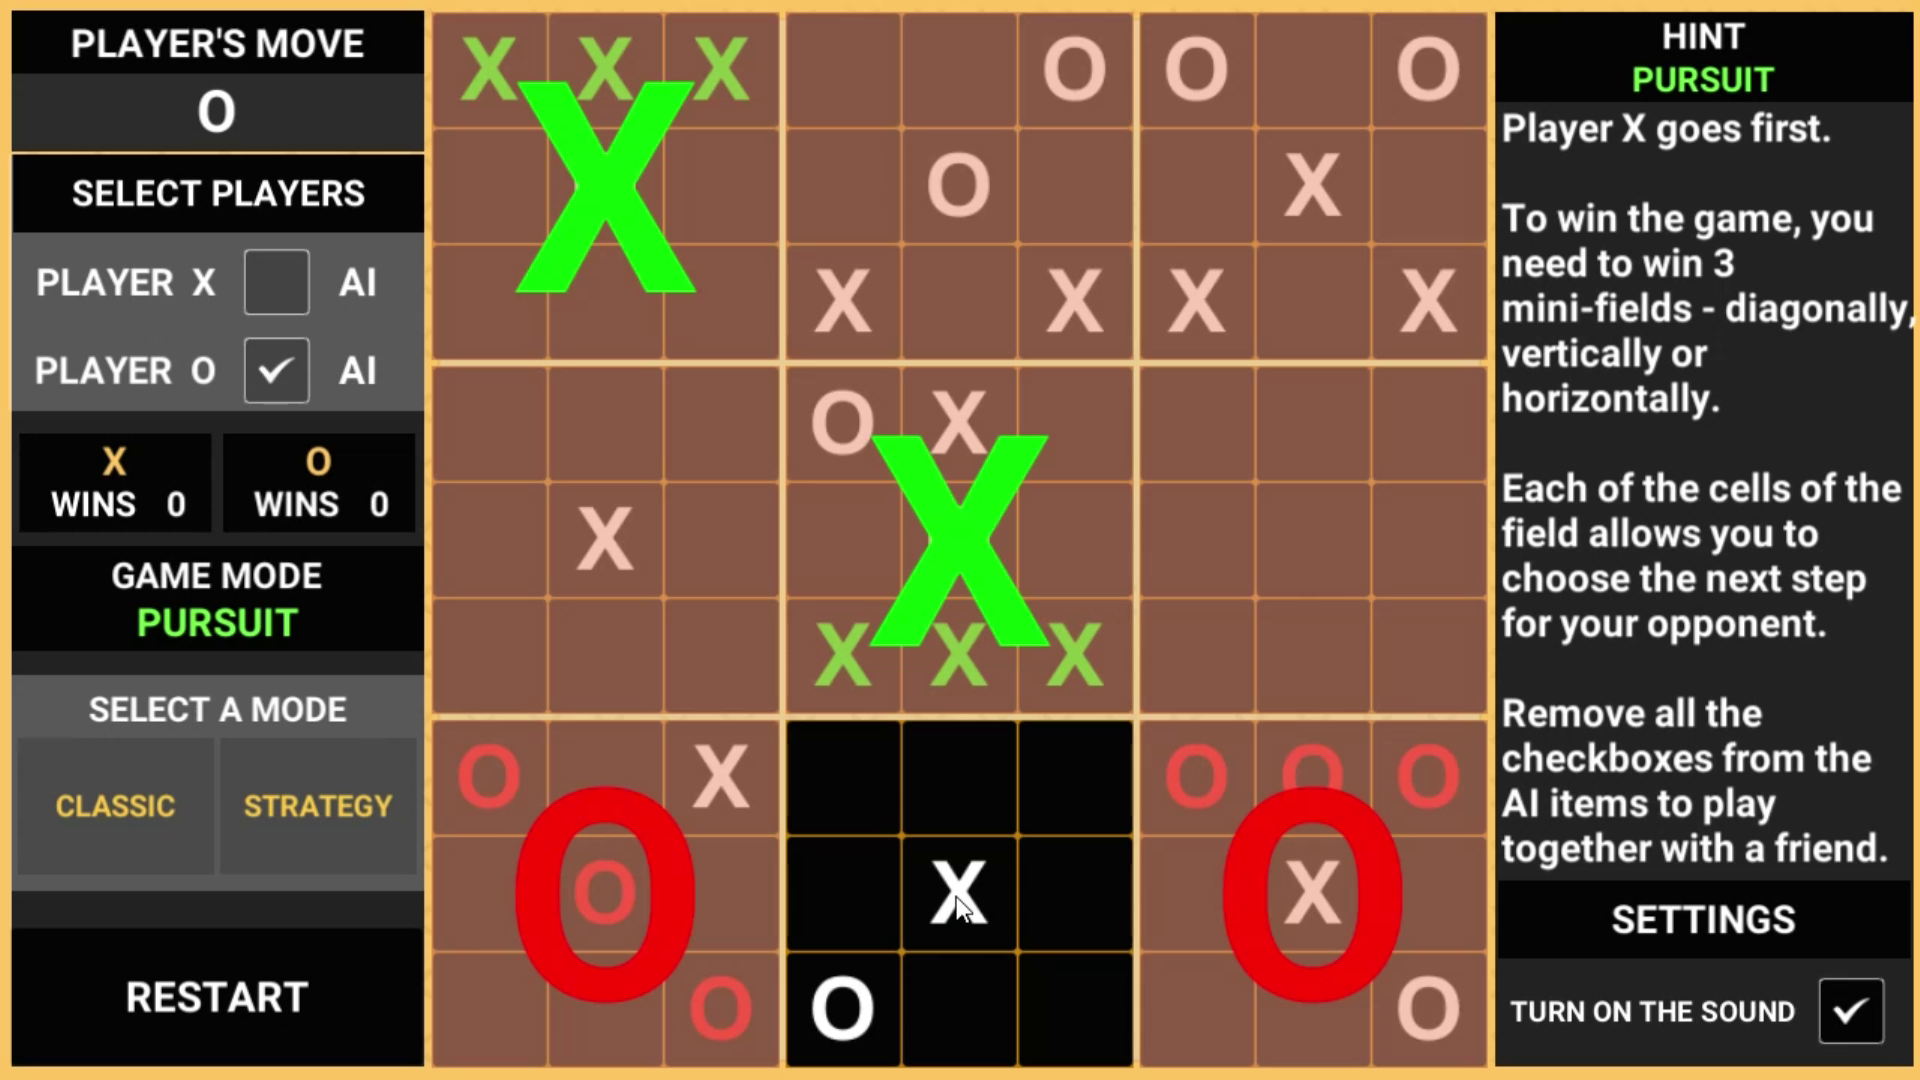 Super Tic-Tac-Toe - An online multiplayer game with a twist on the